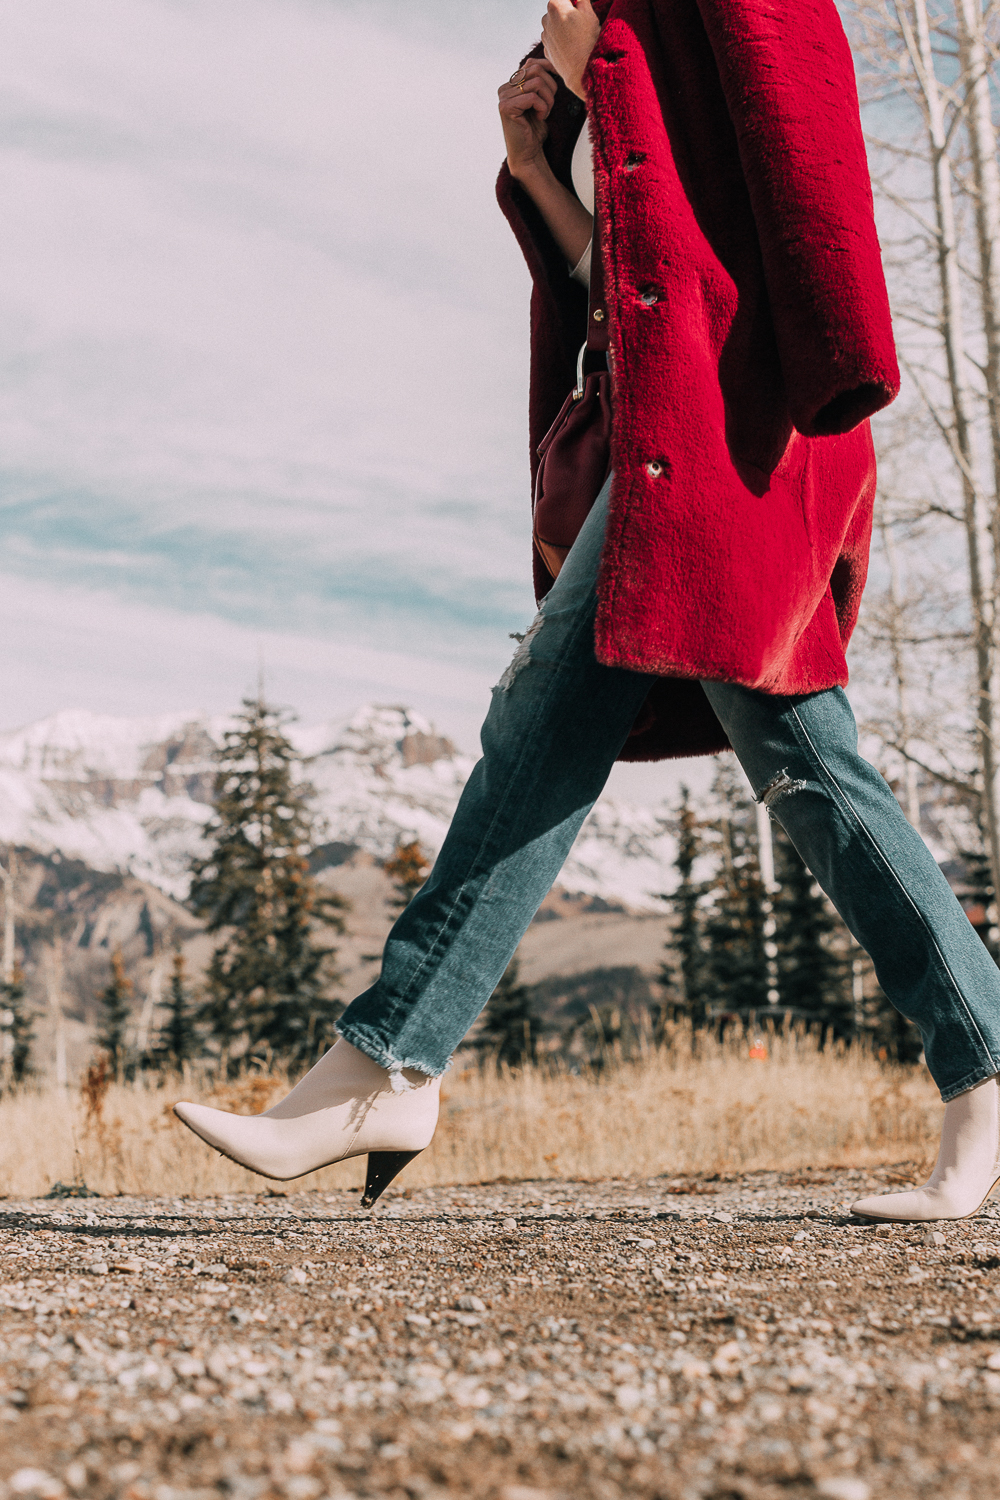 Bootie Trend, how to wear your ankle boots with dresses and jeans featuring white booties with a cone heel by Vince Camuto paired with a reversible faux fur coat, white turtleneck and Mother dazzler jeans